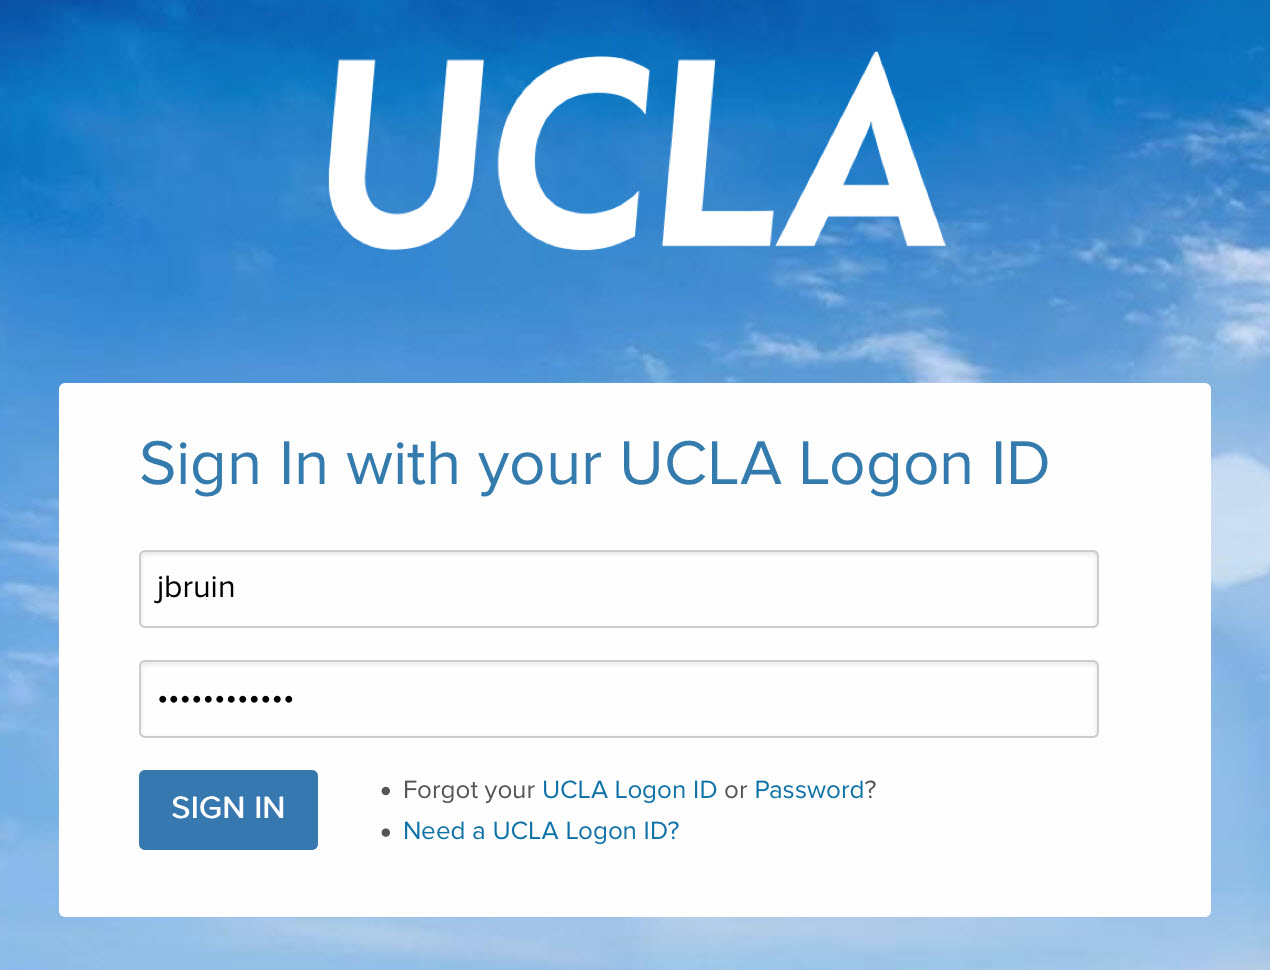 Log in with UCLA Logon ID and password